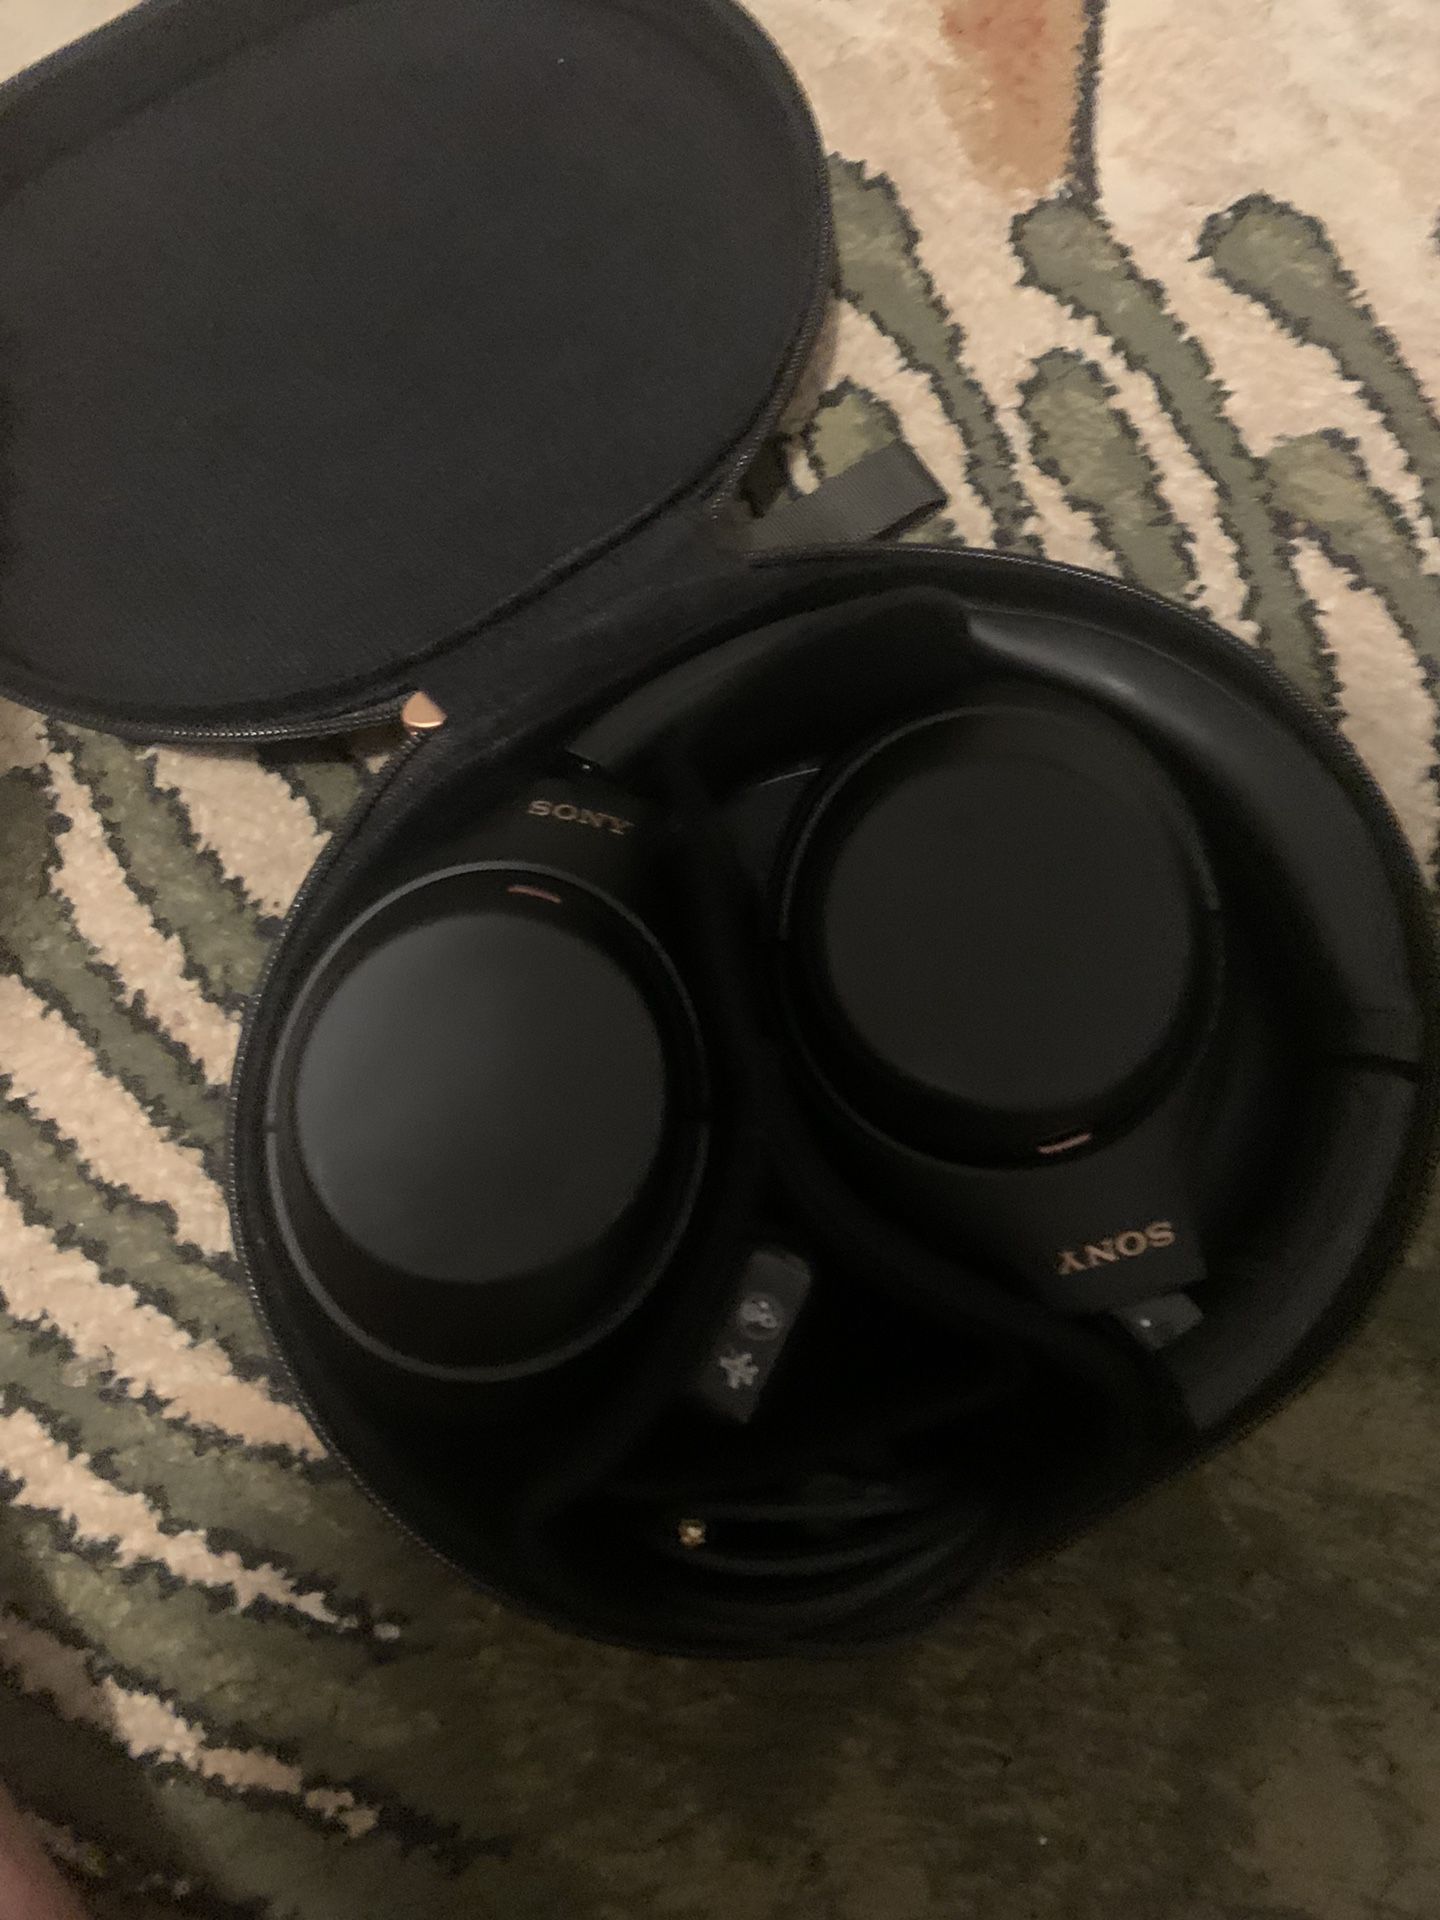 Sony WHCH520/B Wireless Headphones for Sale in Queens, NY - OfferUp